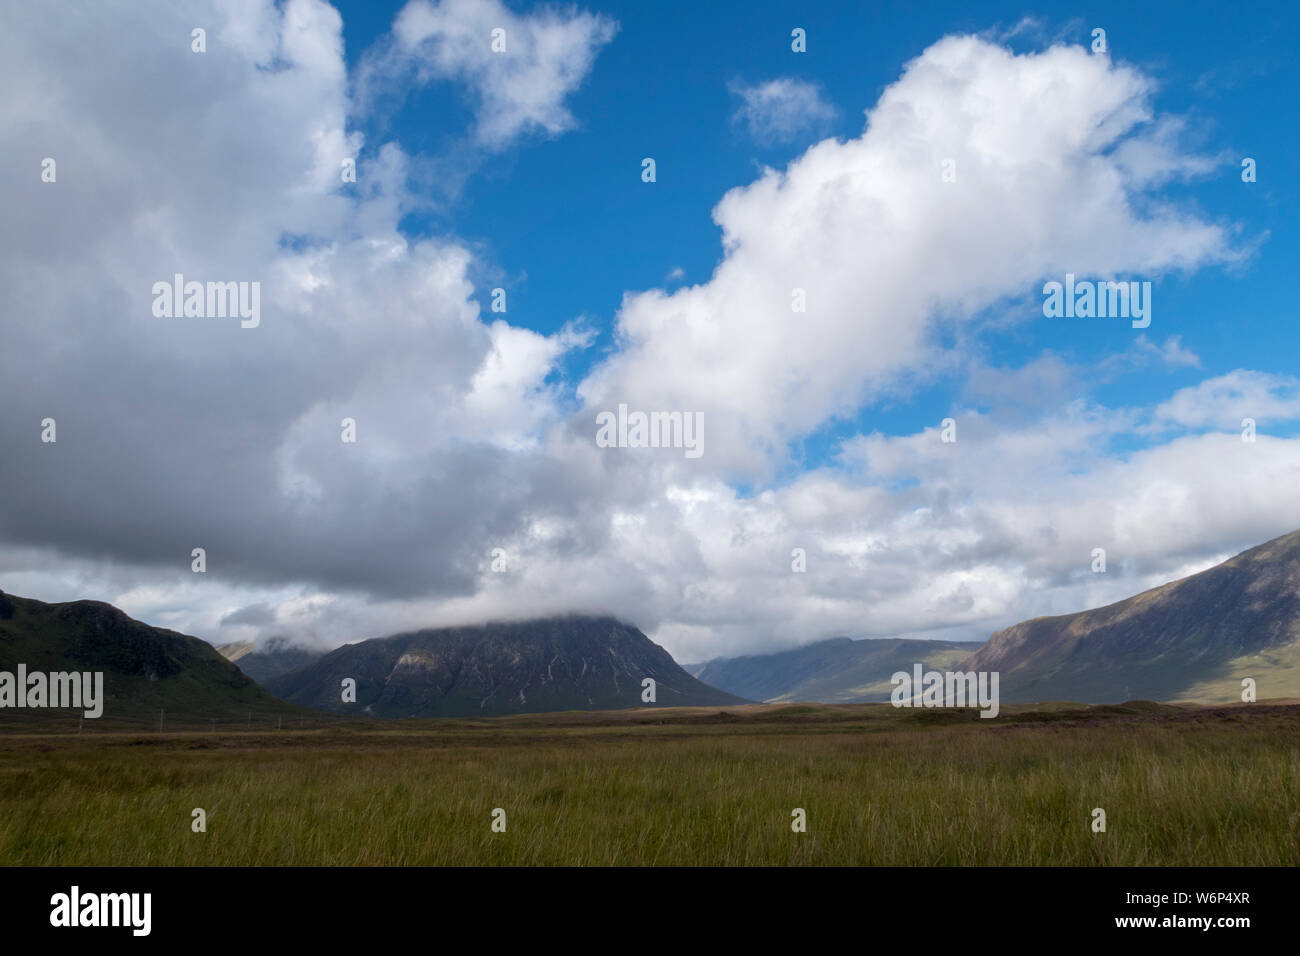 A mountain view near Glencoe, Scotland with wide view blue sky and nice clouds Stock Photo